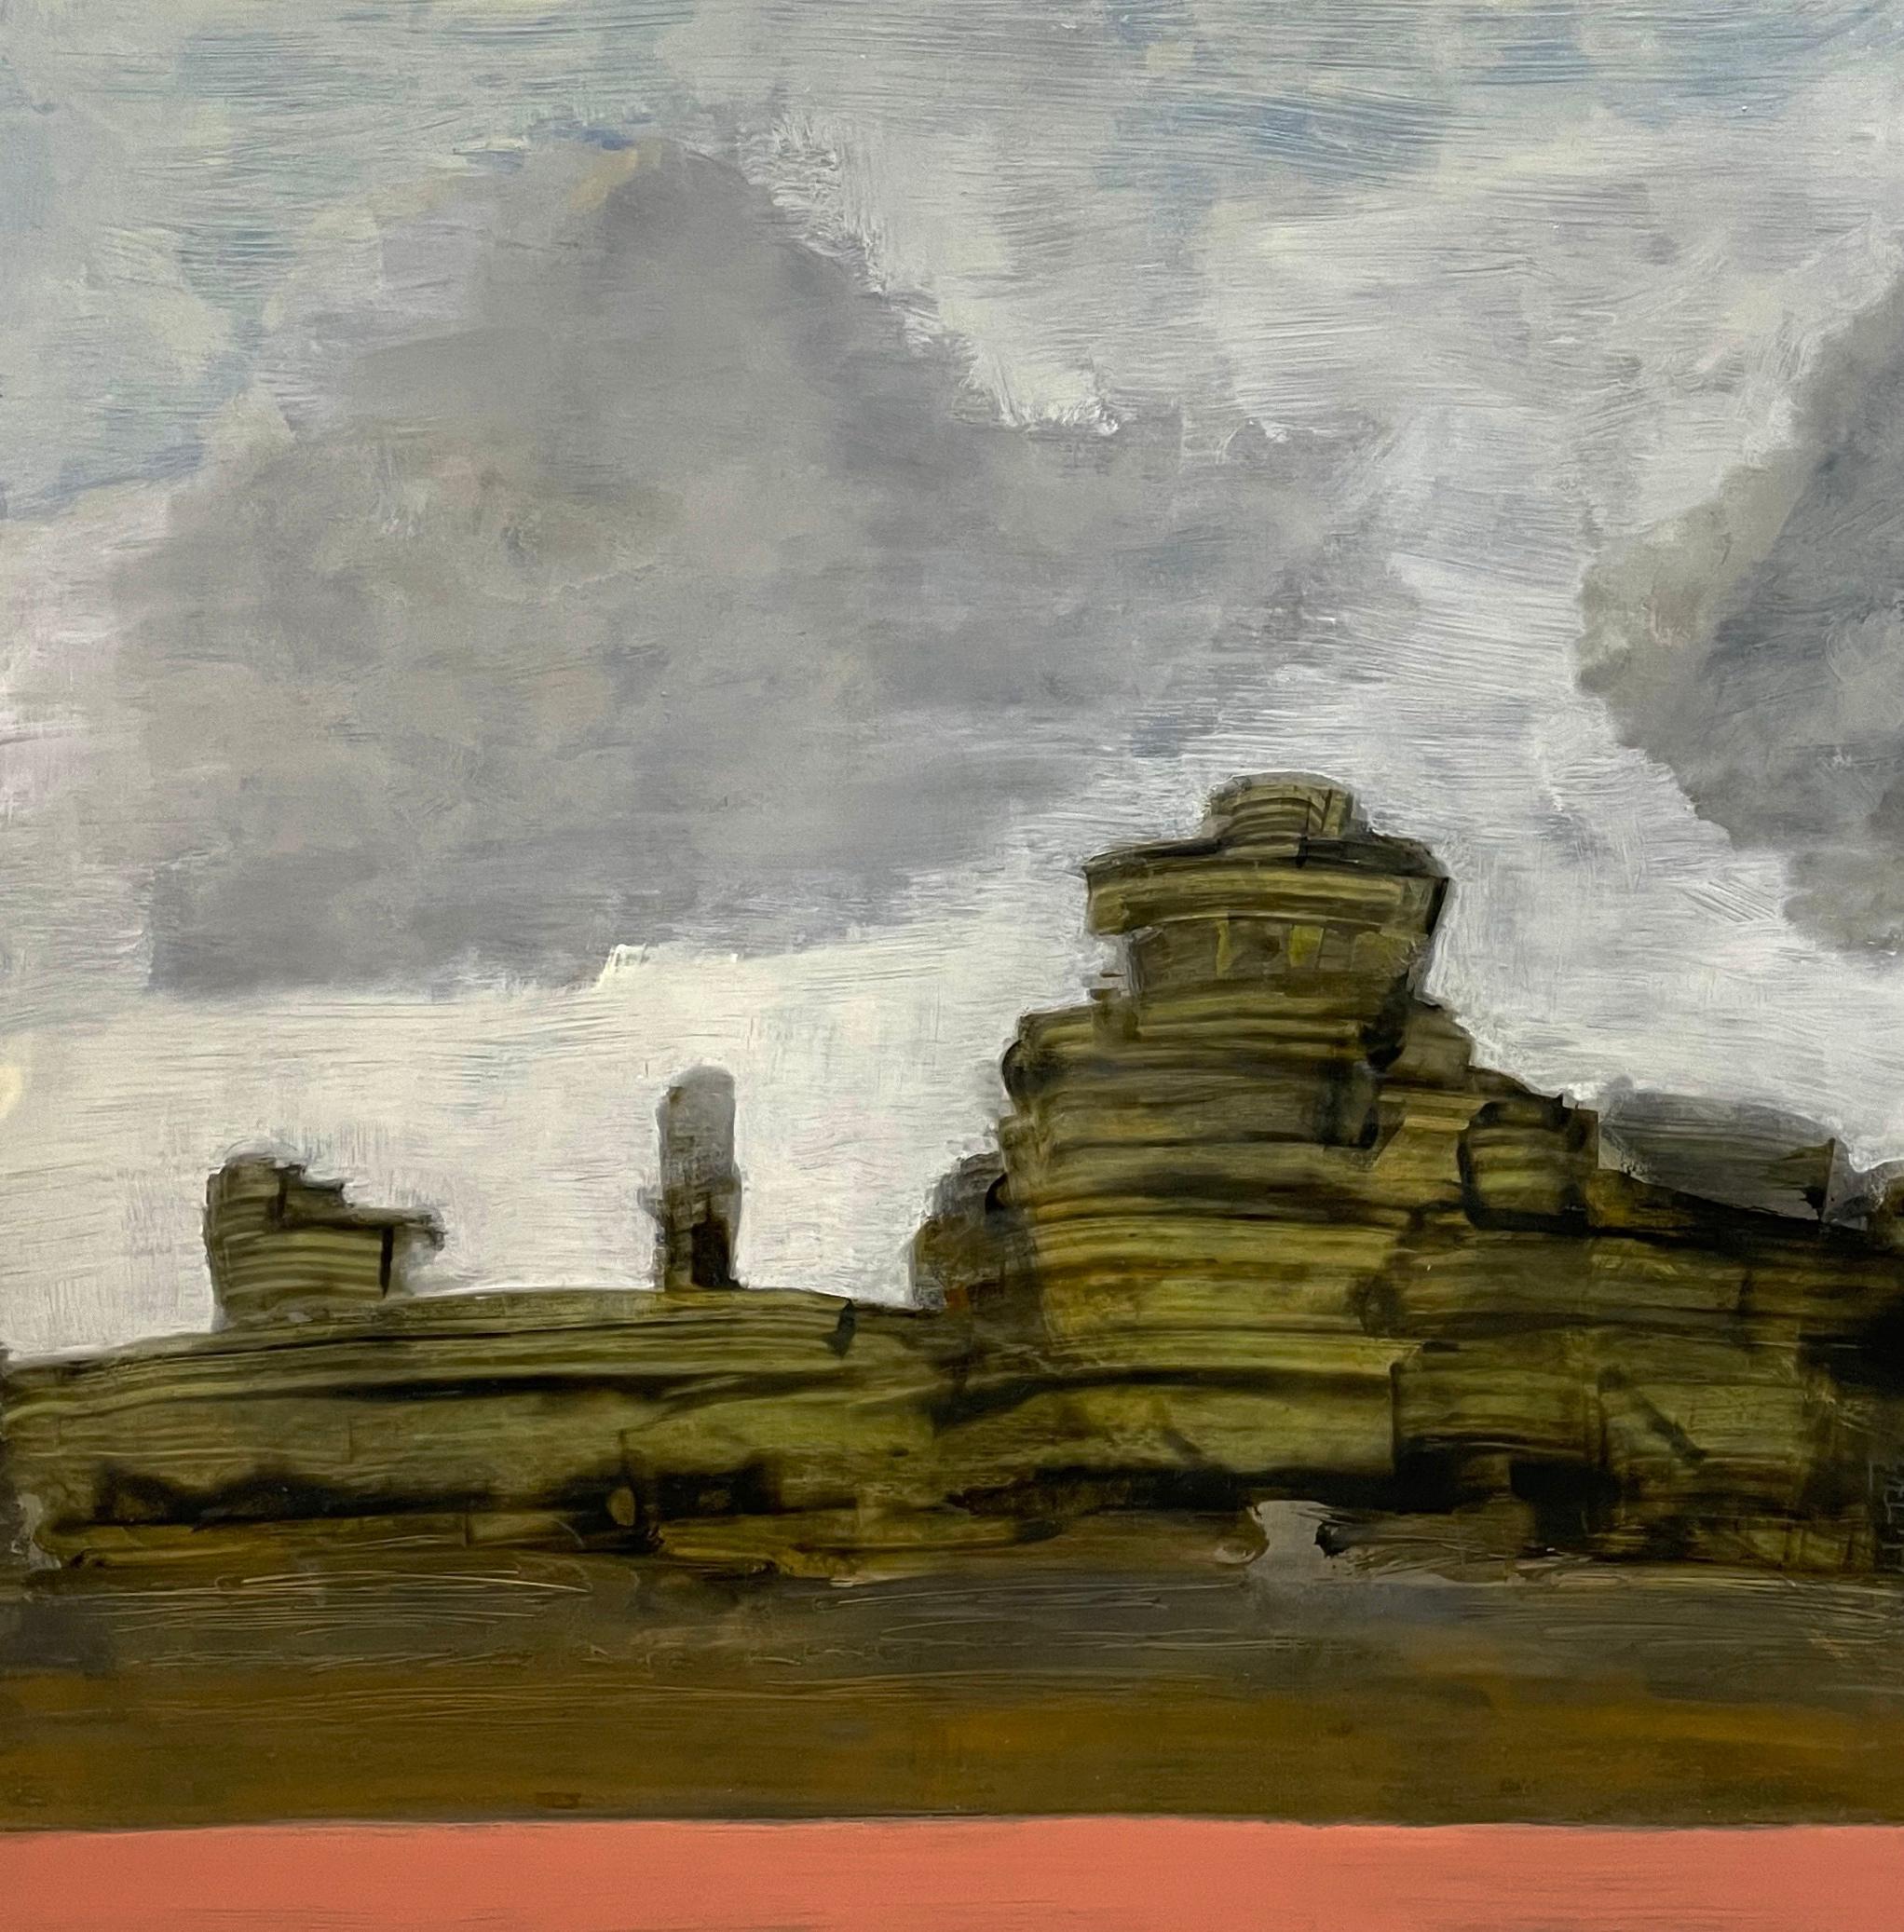 David Konigsberg Landscape Painting - Space and Mass Out There, Desert Landscape, Rock Formations, Clouds, Sky